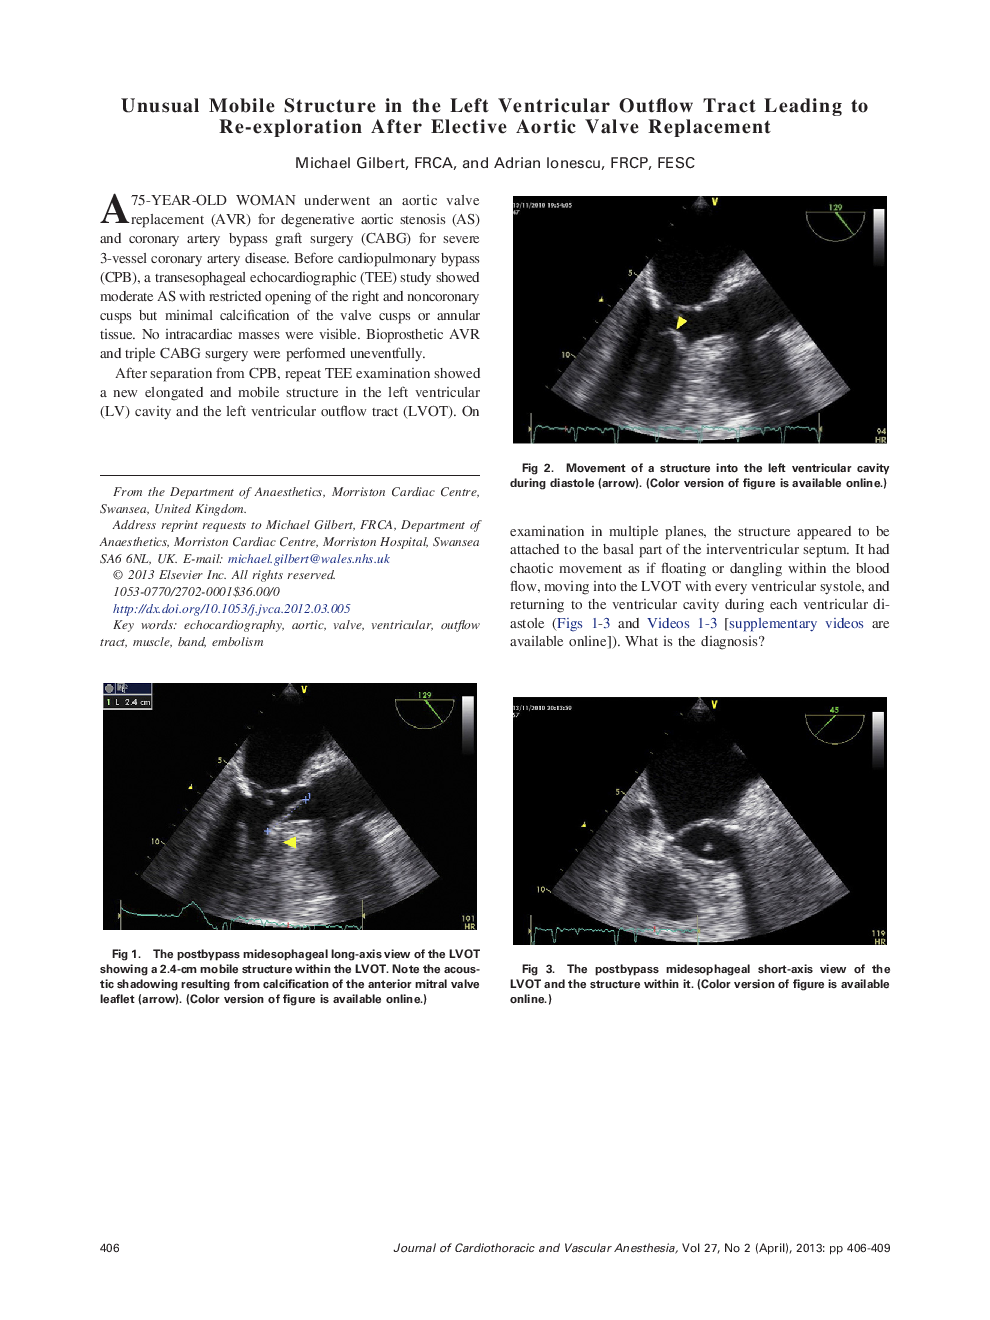 Unusual Mobile Structure in the Left Ventricular Outflow Tract Leading to Re-exploration After Elective Aortic Valve Replacement